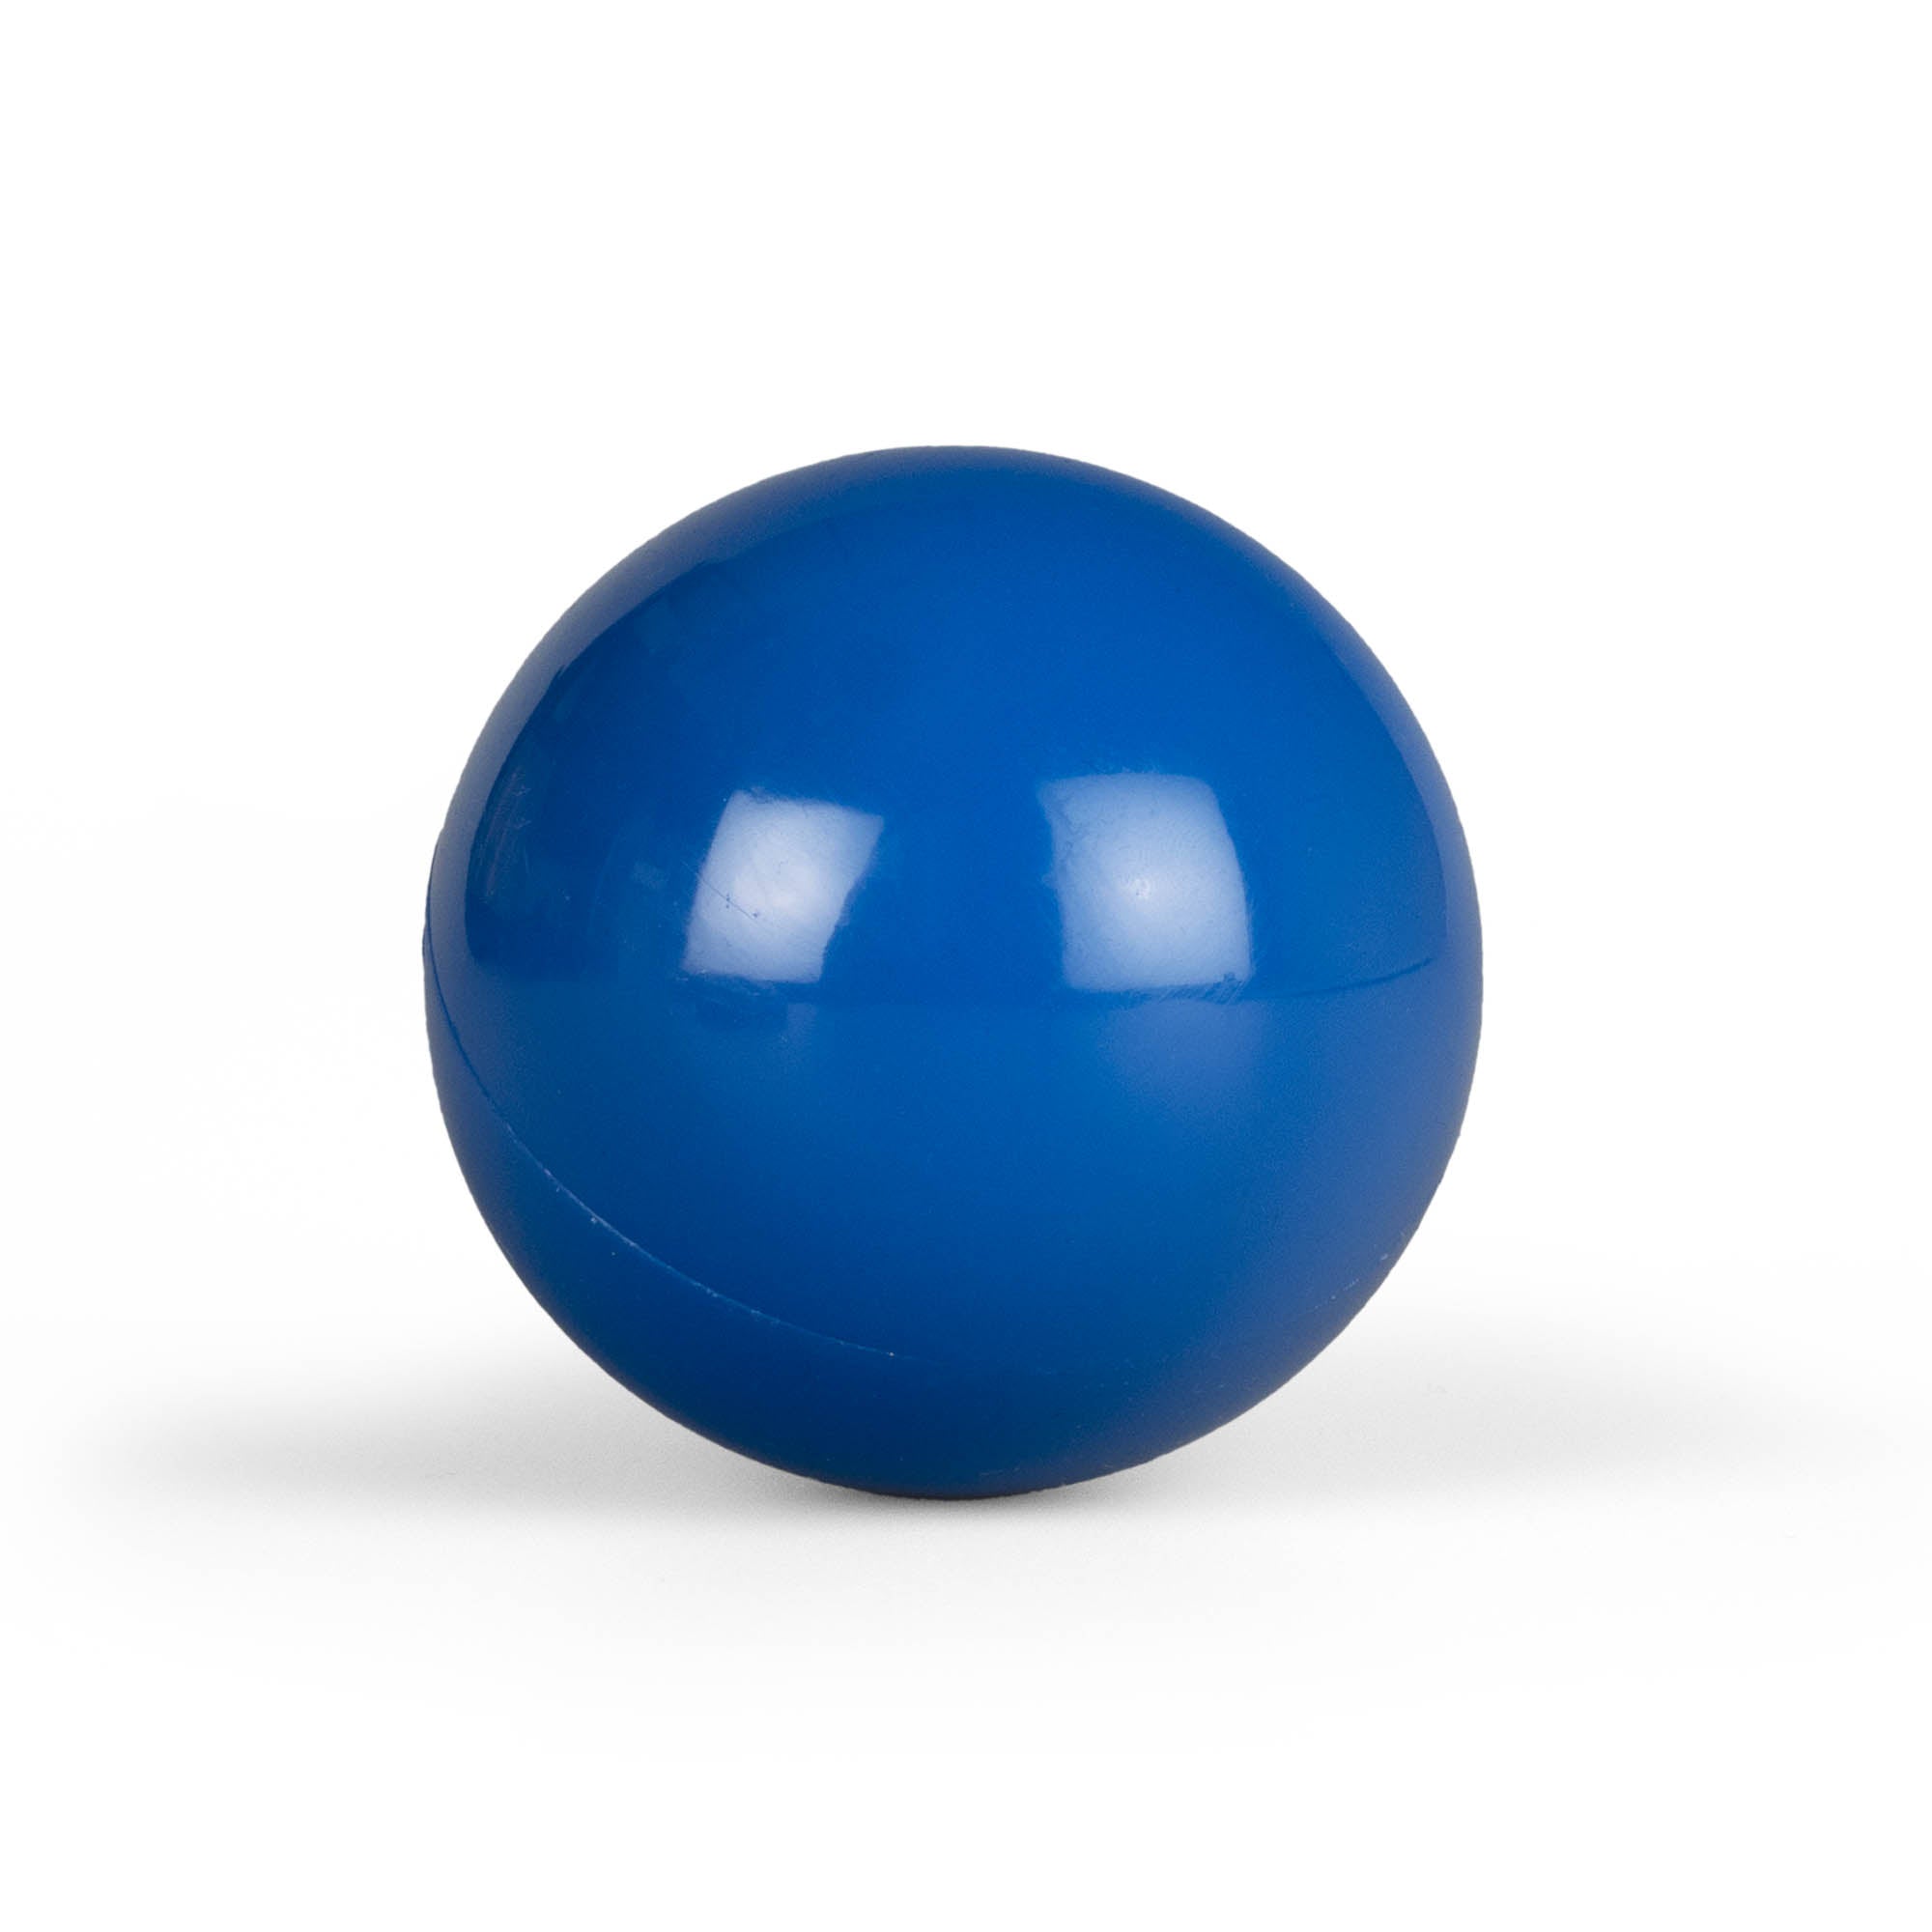 Mr babache 100mm stage ball blue straight on white background